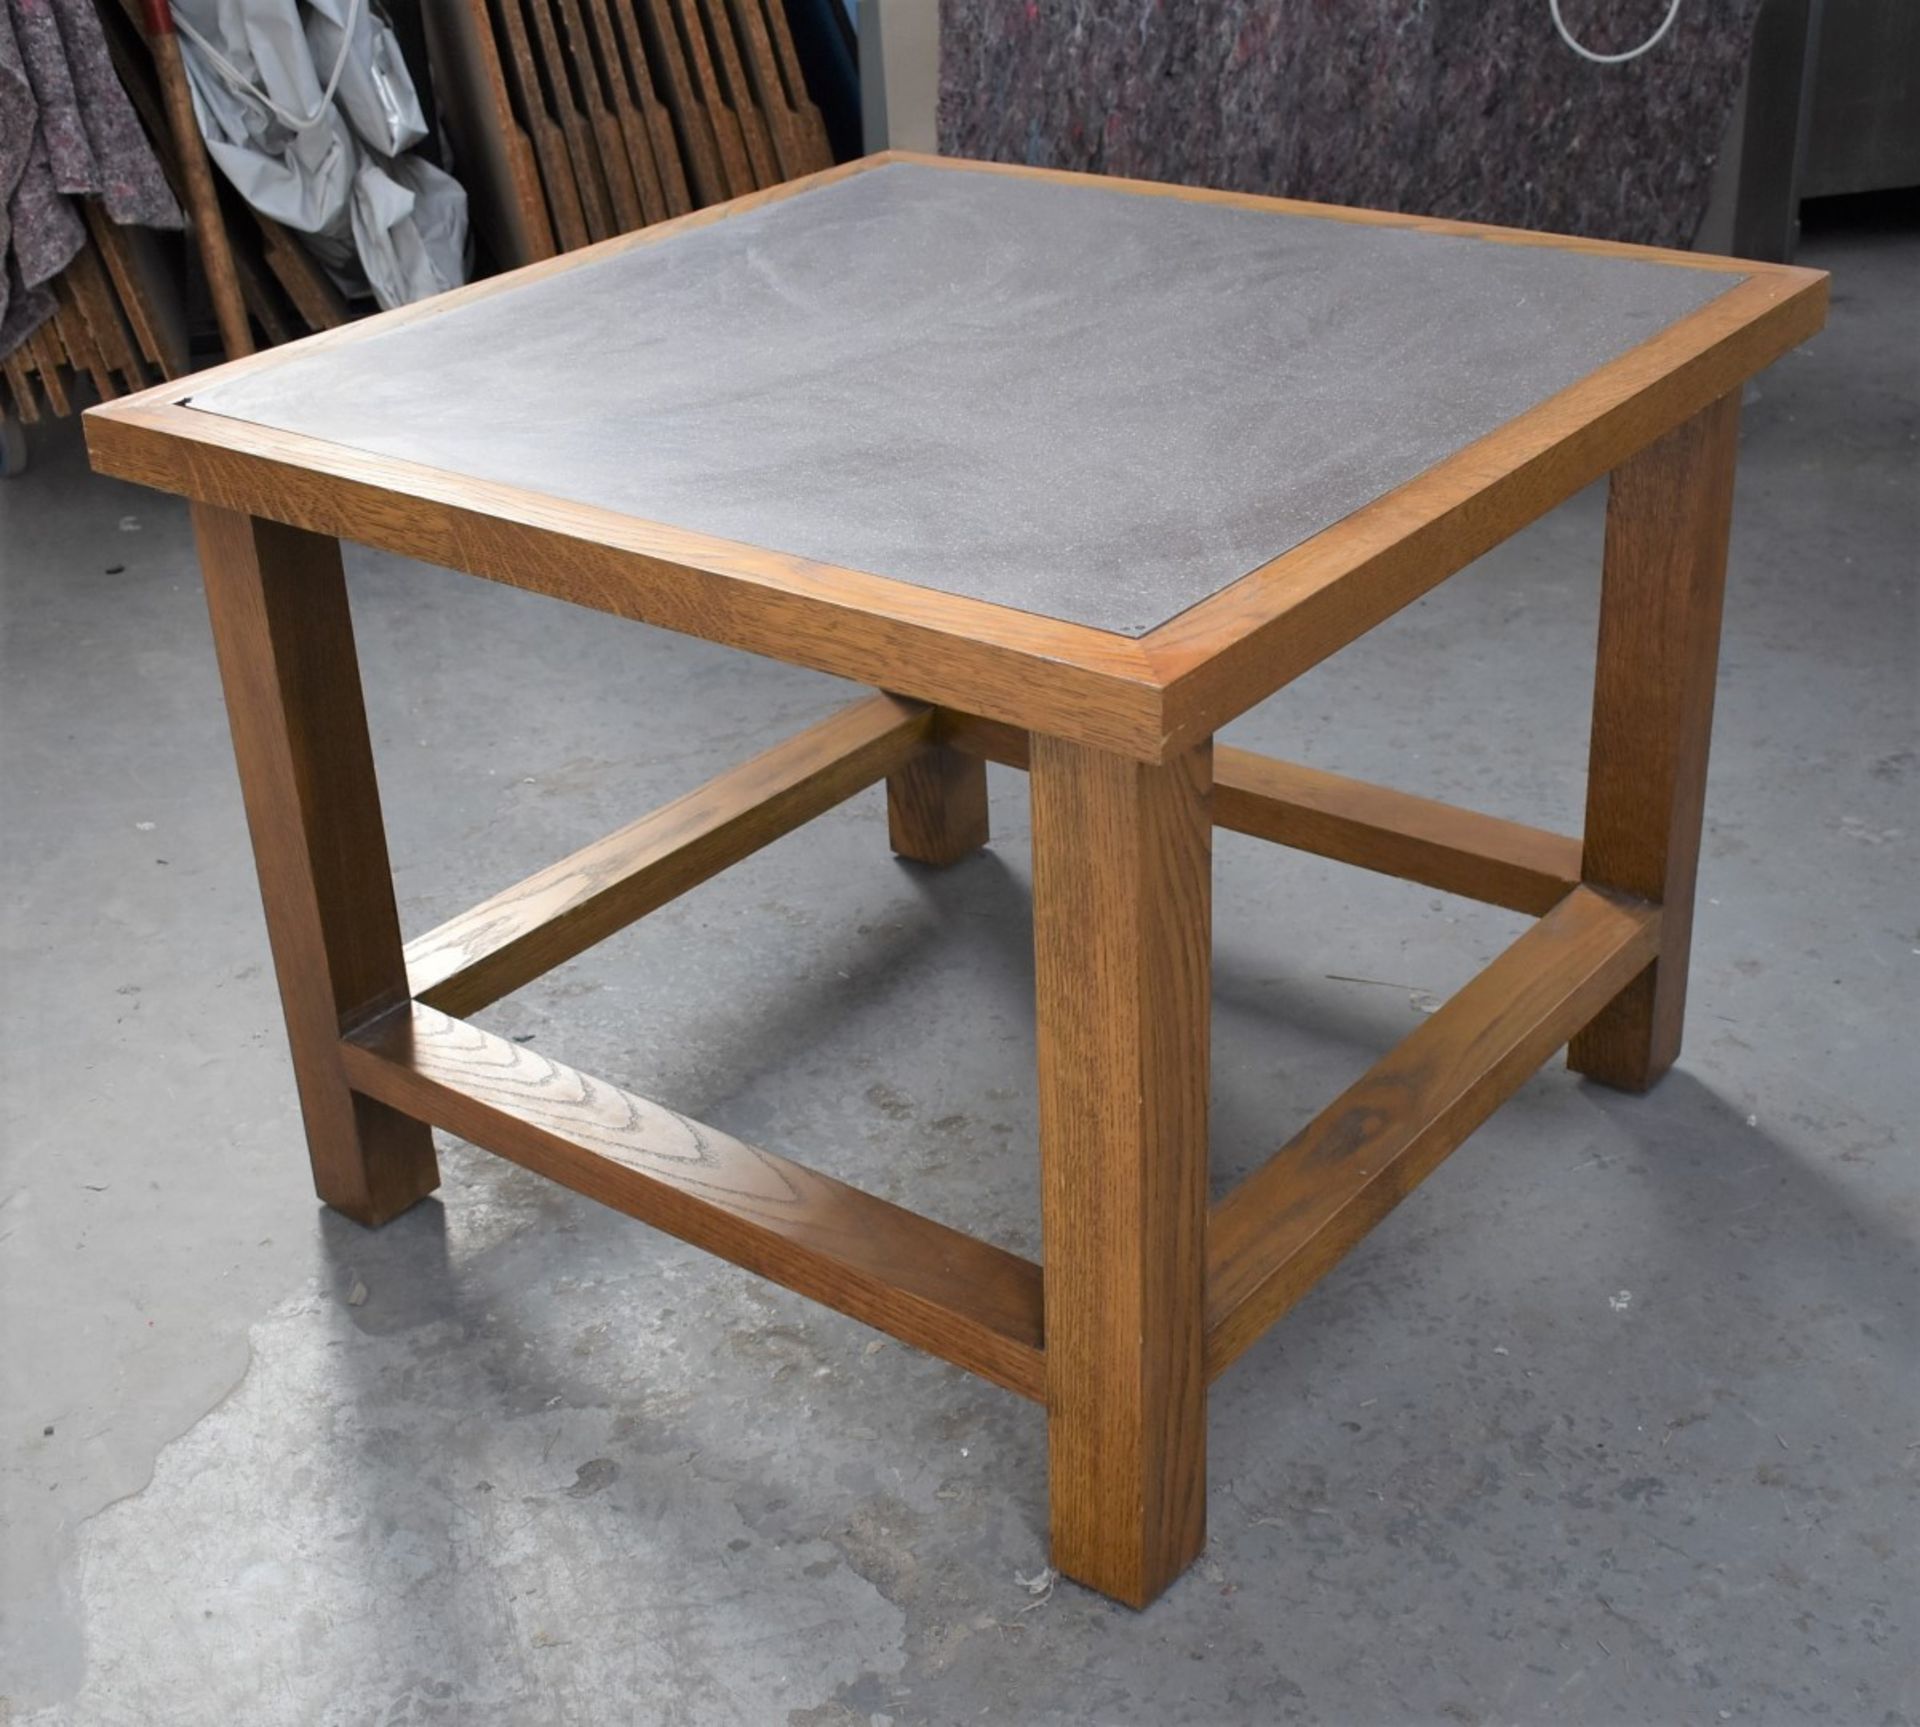 1 x Solid Oak Table With a Stone Insert Top - H77 x W100 x D100 cms